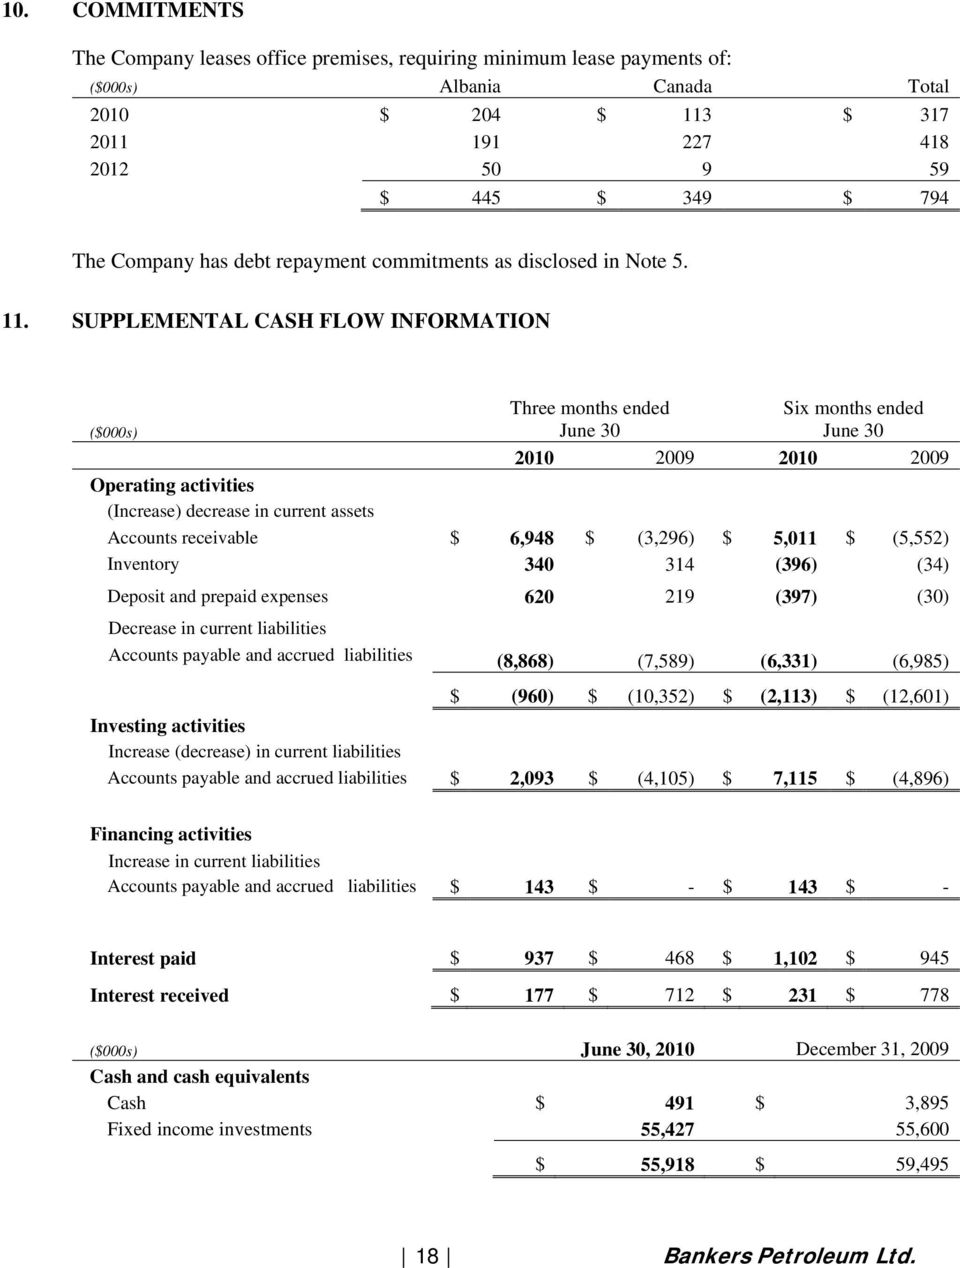 SUPPLEMENTAL CASH FLOW INFORMATION ($000s) Three months ended June 30 Six months ended June 30 2010 2009 2010 2009 Operating activities (Increase) decrease in current assets Accounts receivable $